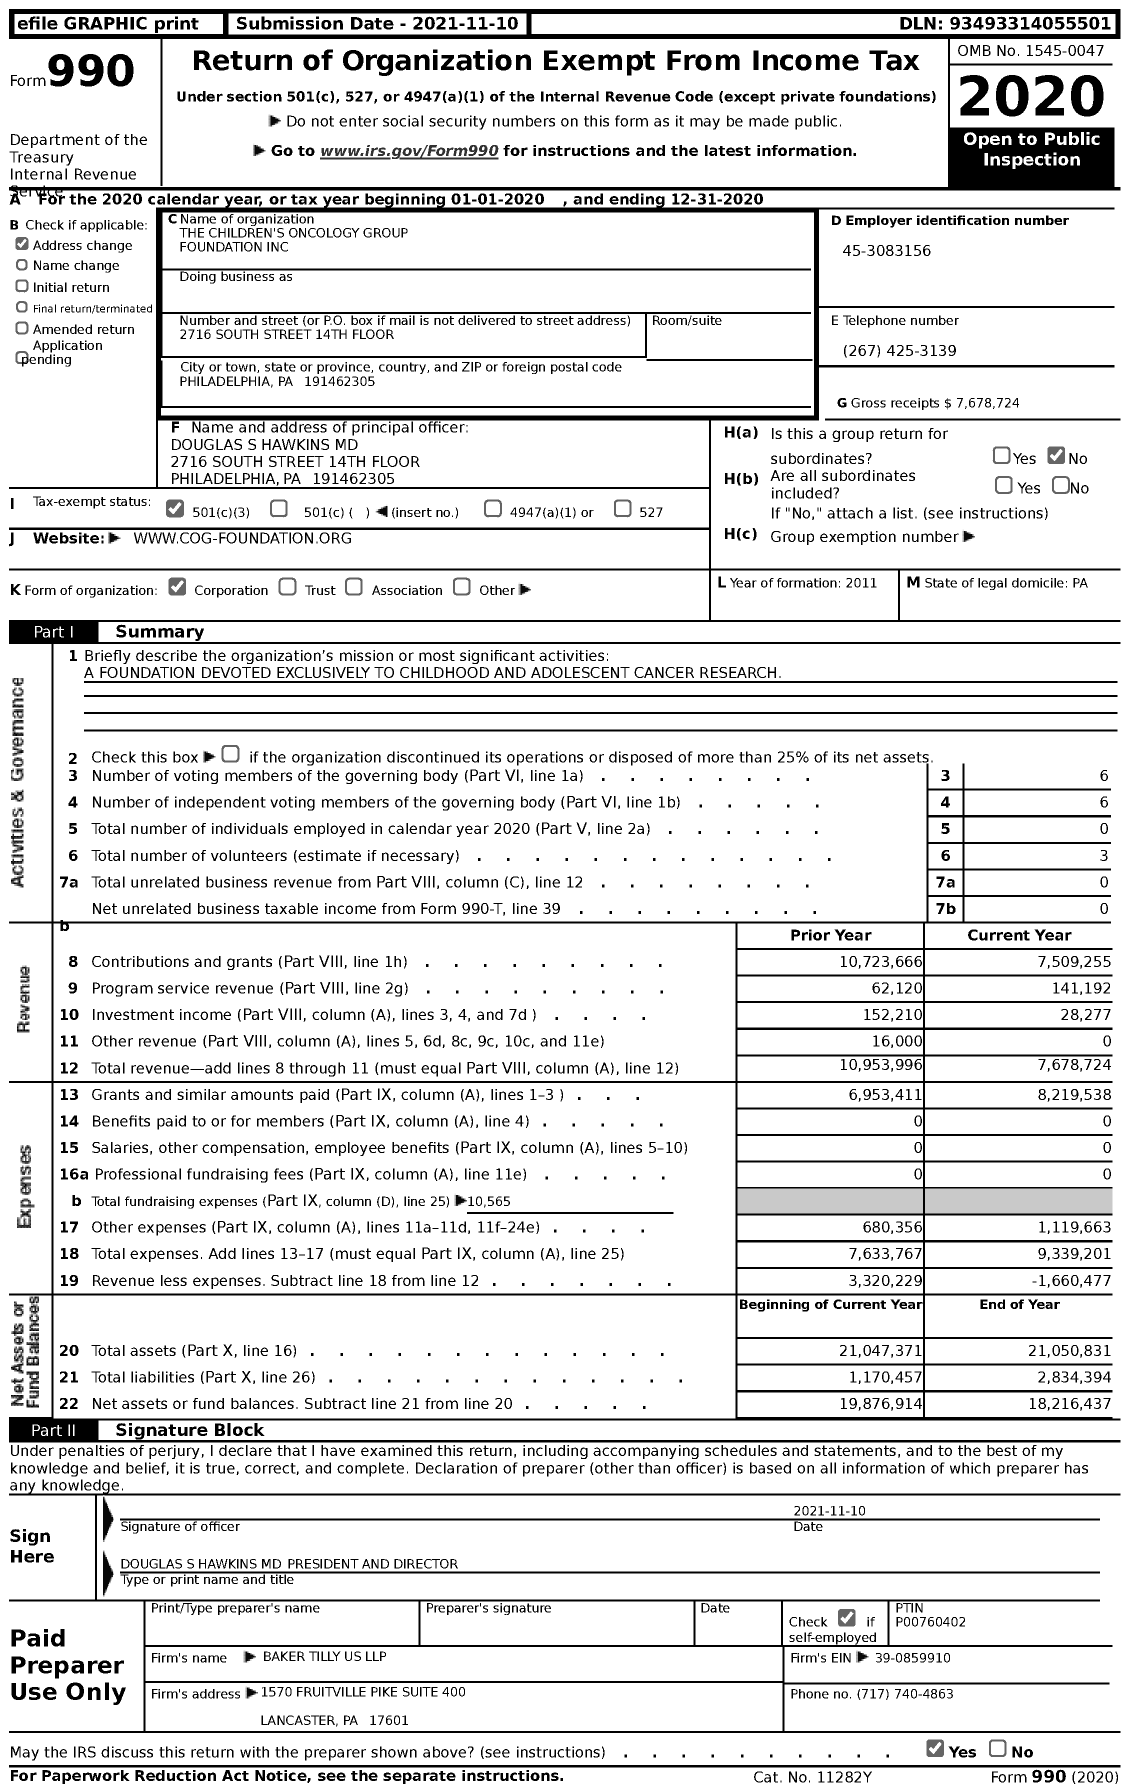 Image of first page of 2020 Form 990 for The Children's Oncology Group Foundation